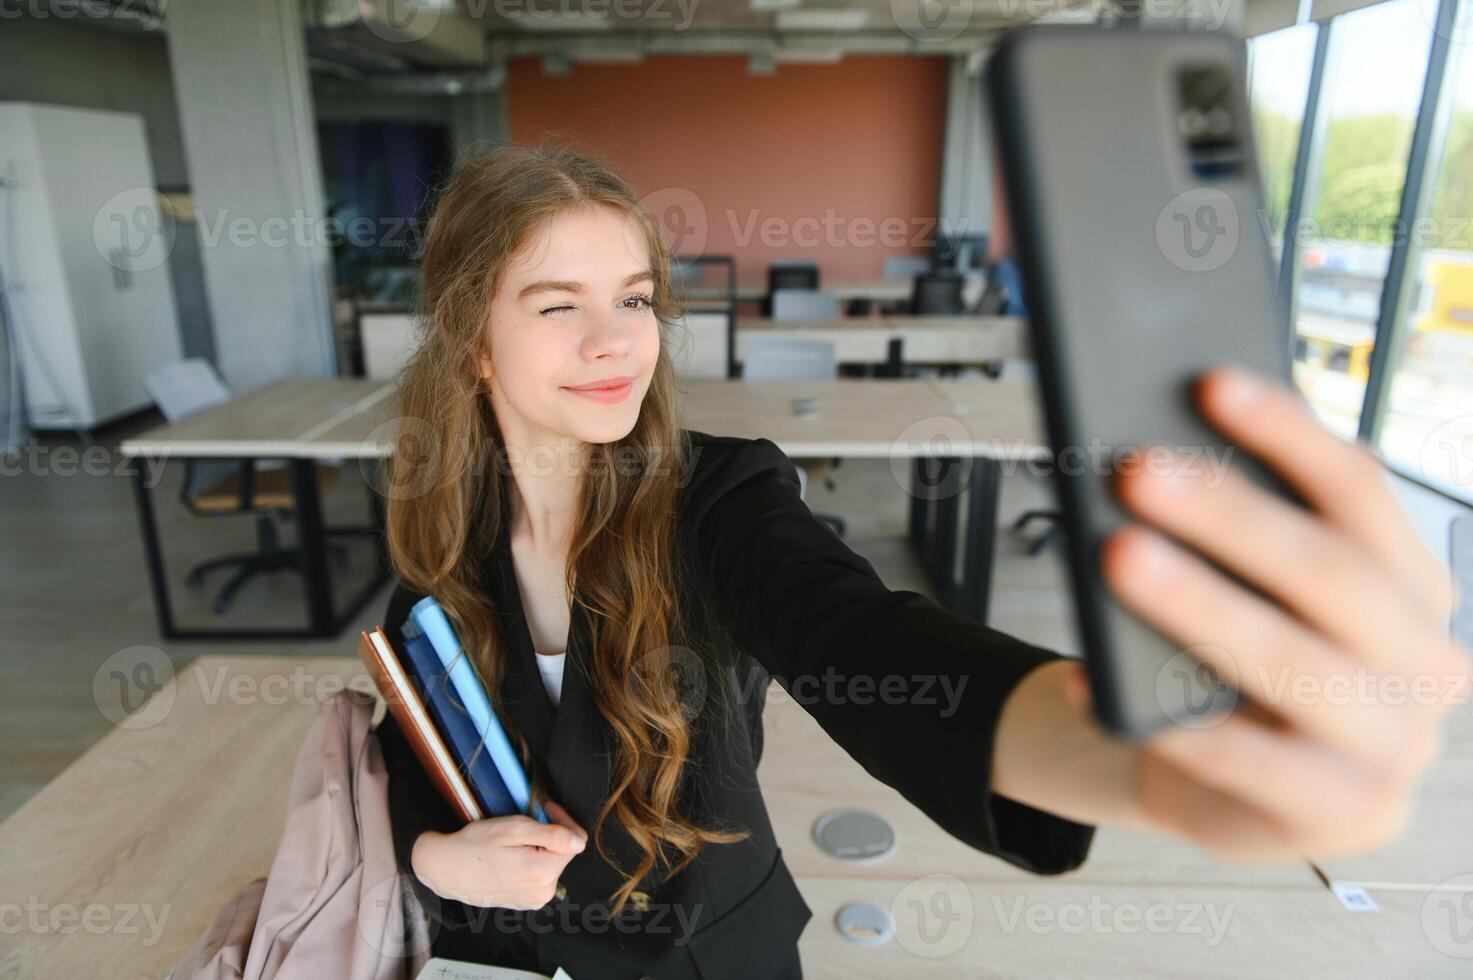 Portrait of a happy cheerful smiling young student schoolgirl lady with long hair standing in empty classroom looking camera take a selfie photo